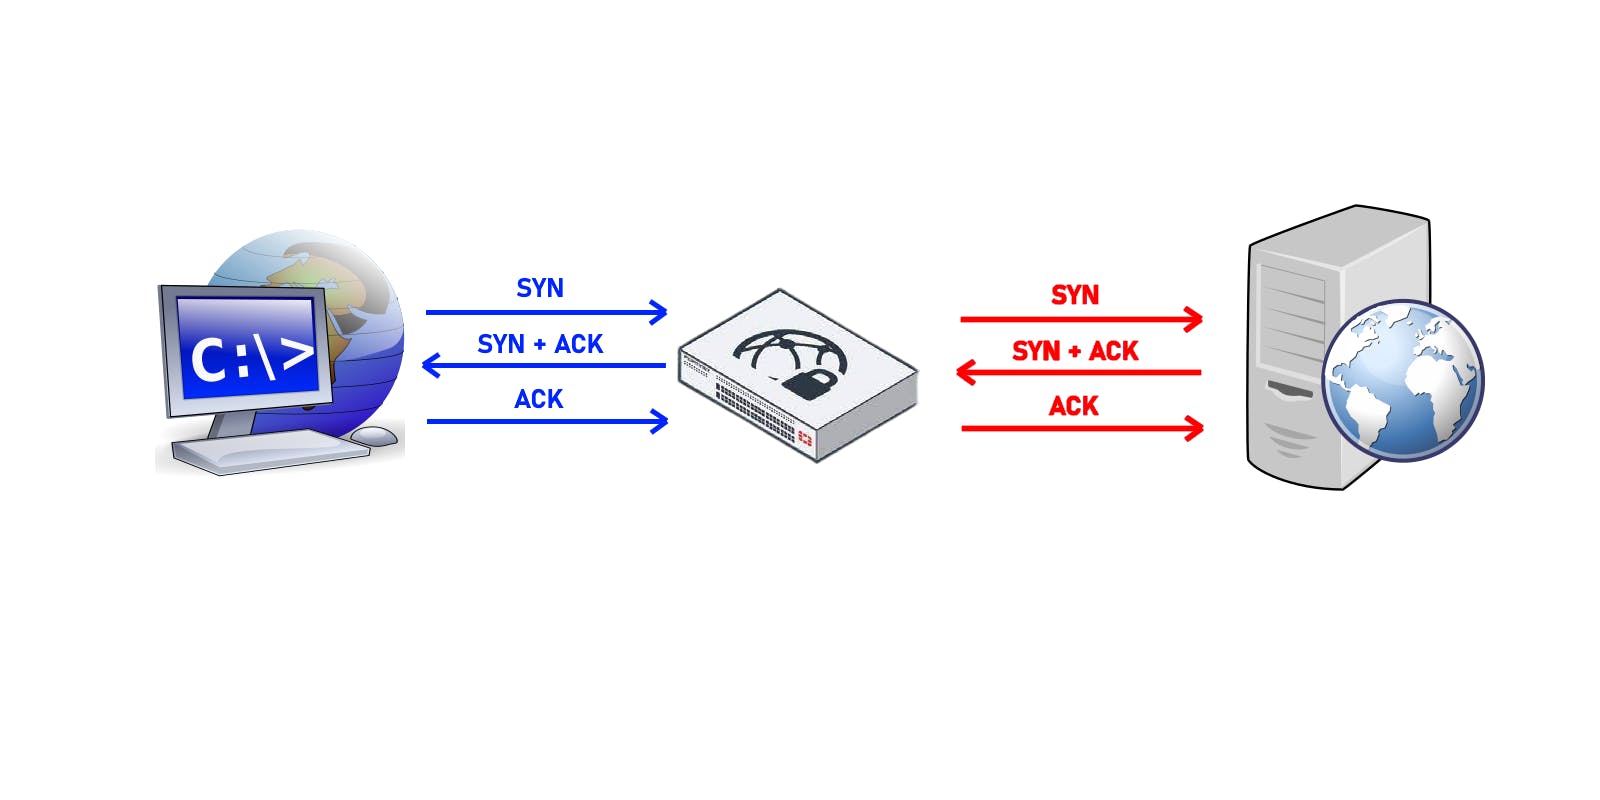 TCP 3-way handshake between client PC, proxy, and web server.